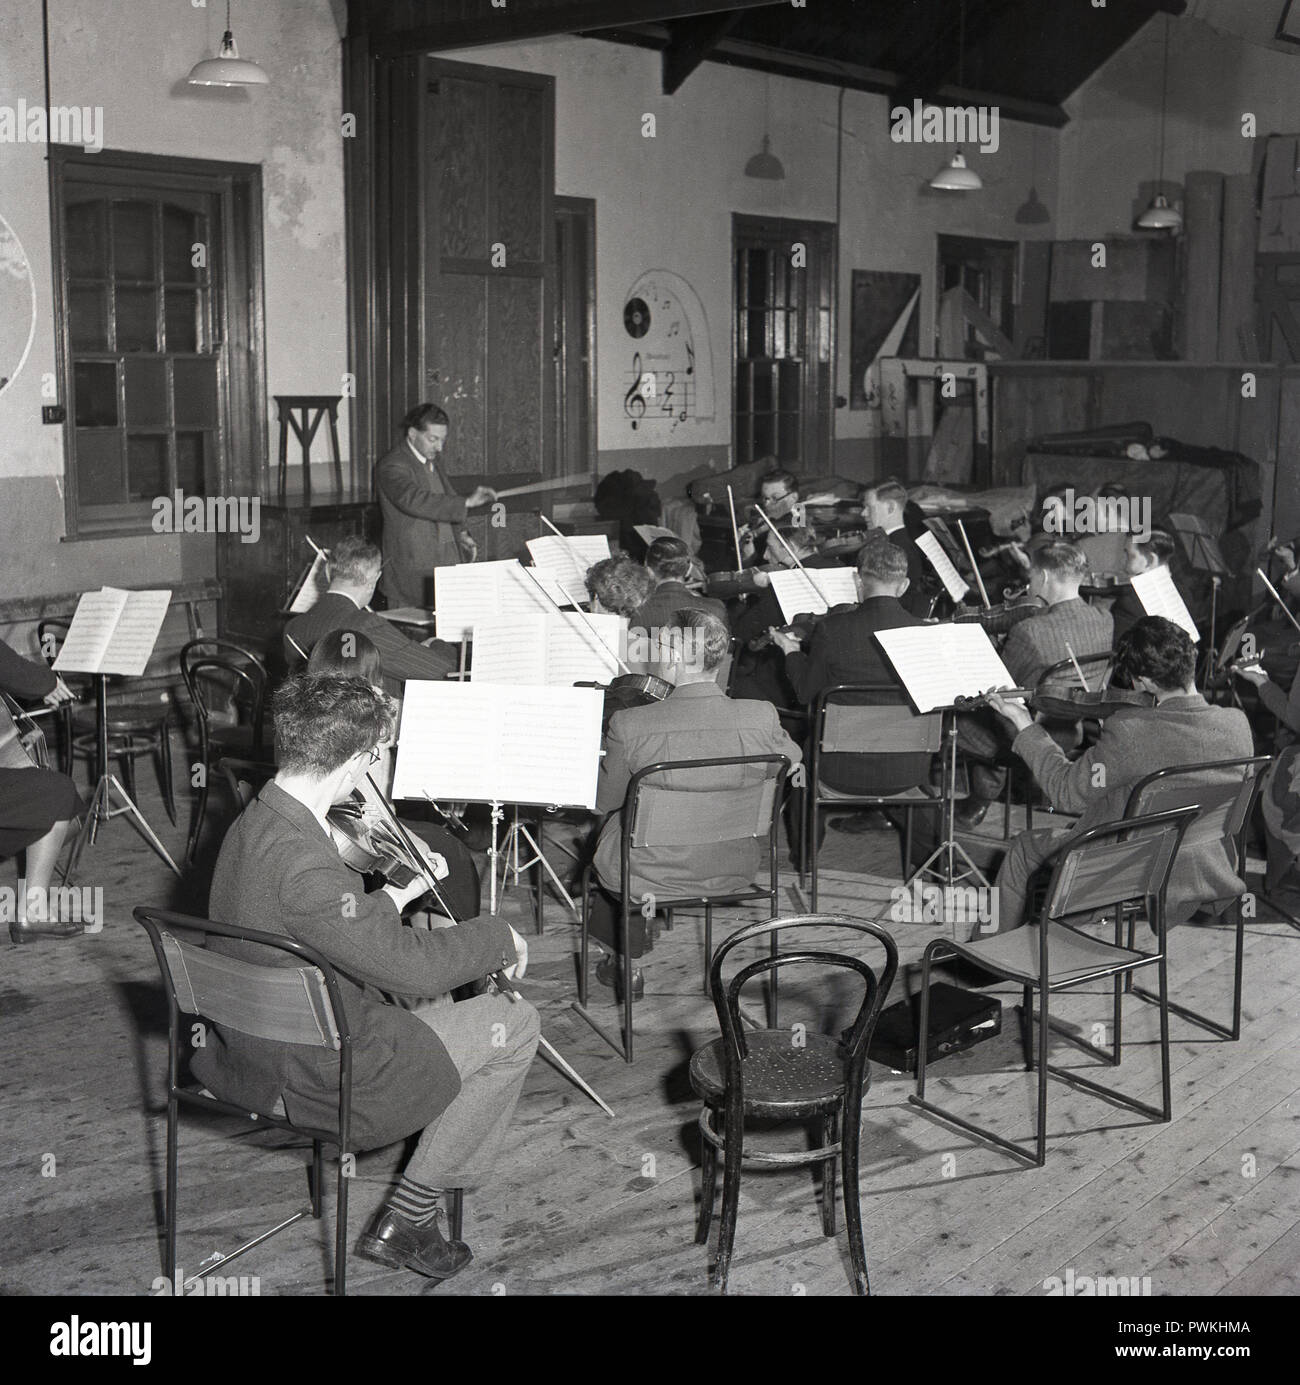 1950s, historical, members or players of an amateur village orchestra led by conductor, practising together inside a parish or community hall, England, UK. Amateur music was, together with amateur dramatics, a popular leisure and social activity for many adults in a bleak post-ww2 Britain. Stock Photo